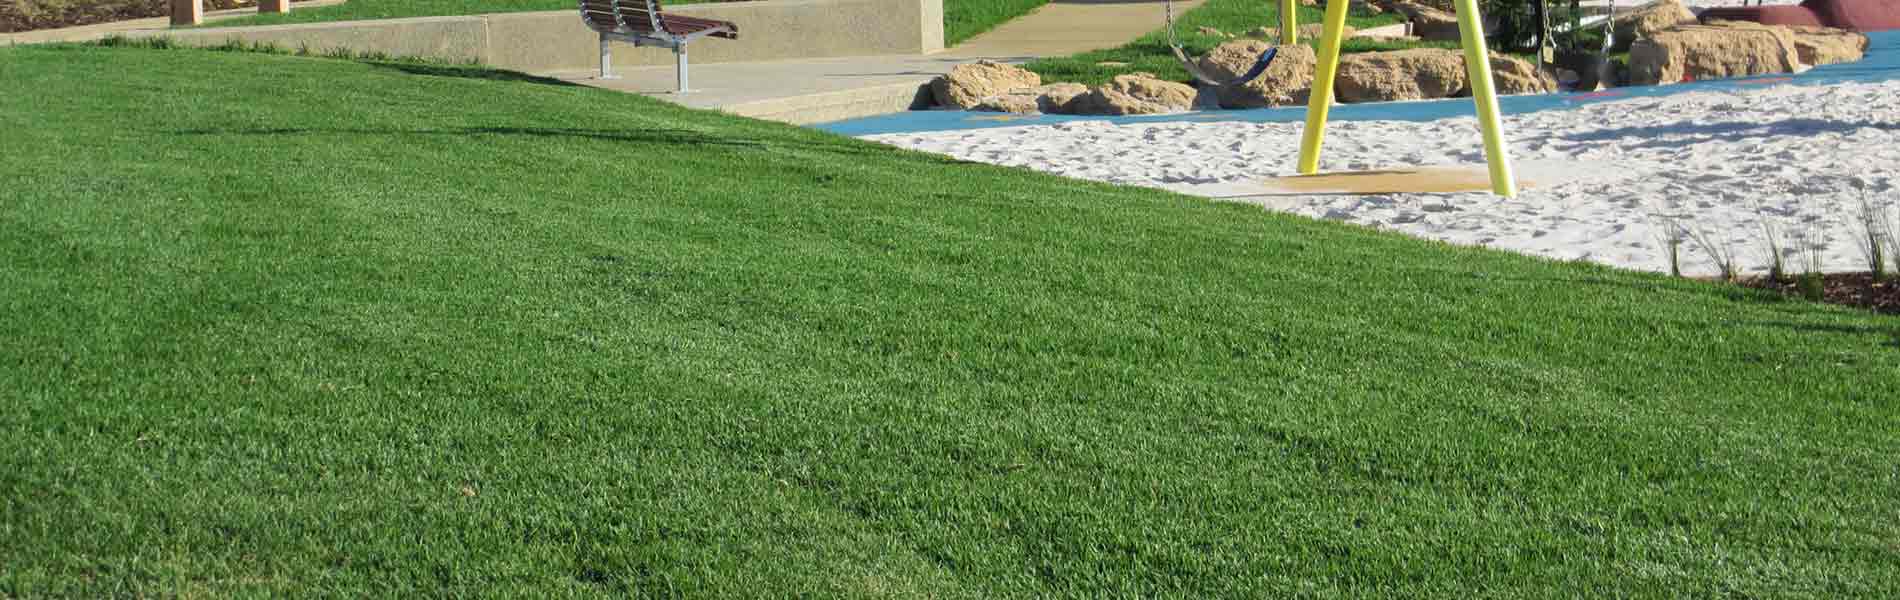 Synthetic Turf Installation Geelong, Surf And Turf Landscaping